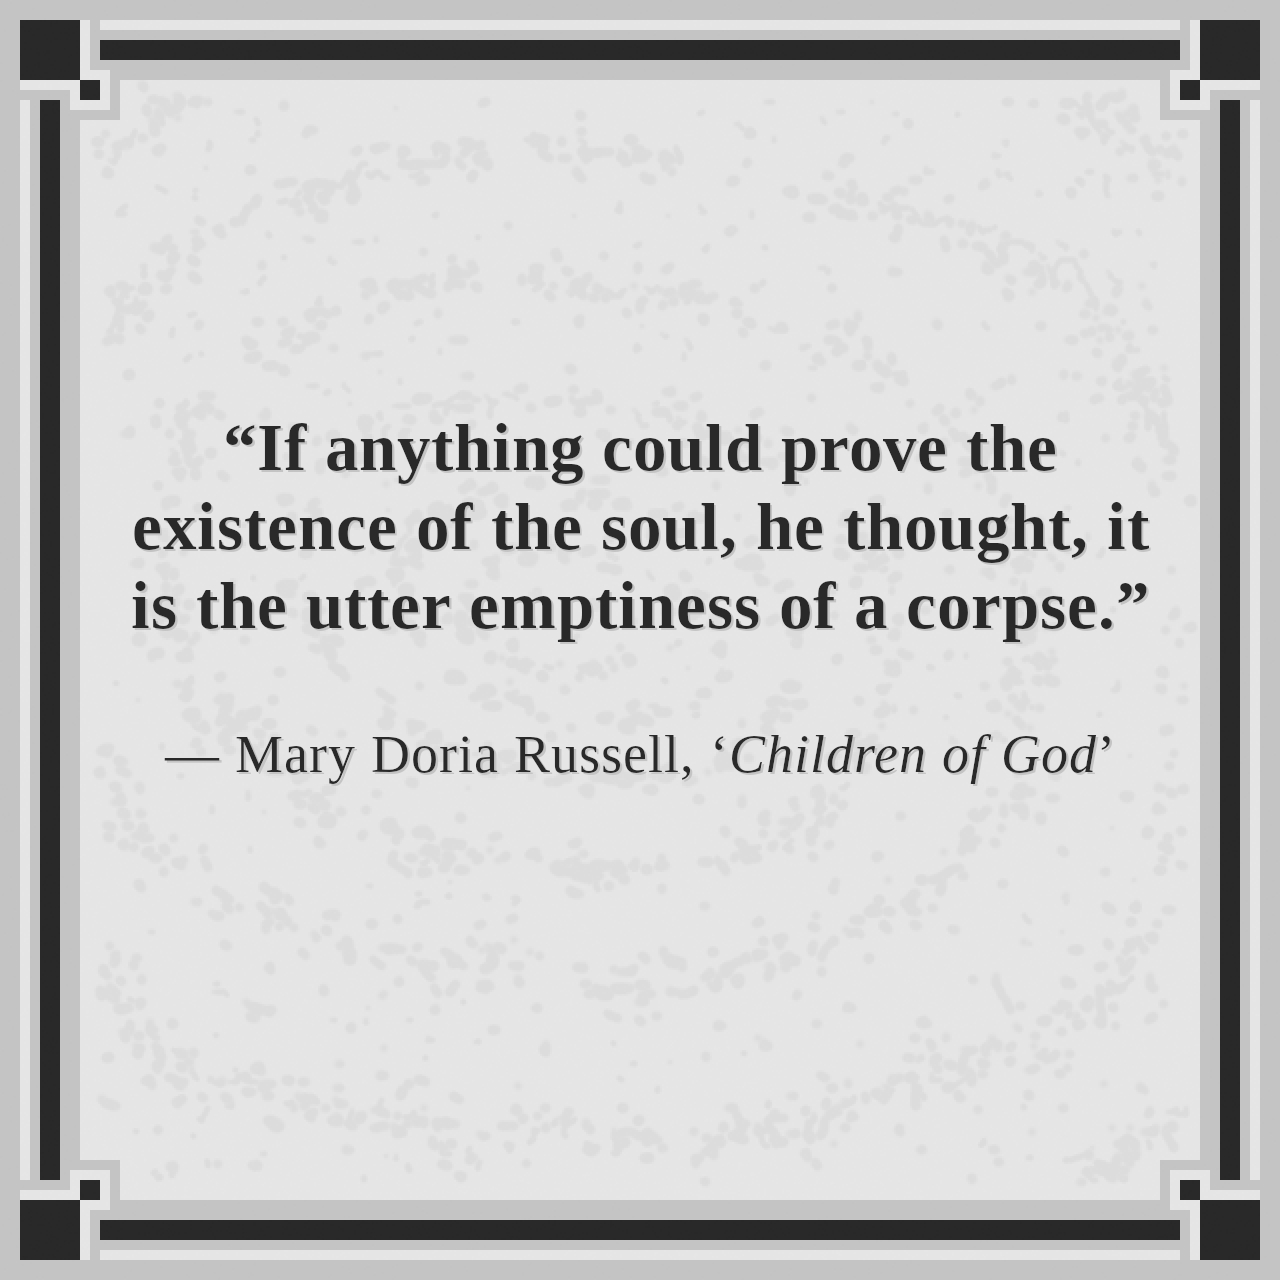 “If anything could prove the existence of the soul, he thought, it is the utter emptiness of a corpse.”

— Mary Doria Russell, ‘Children of God’